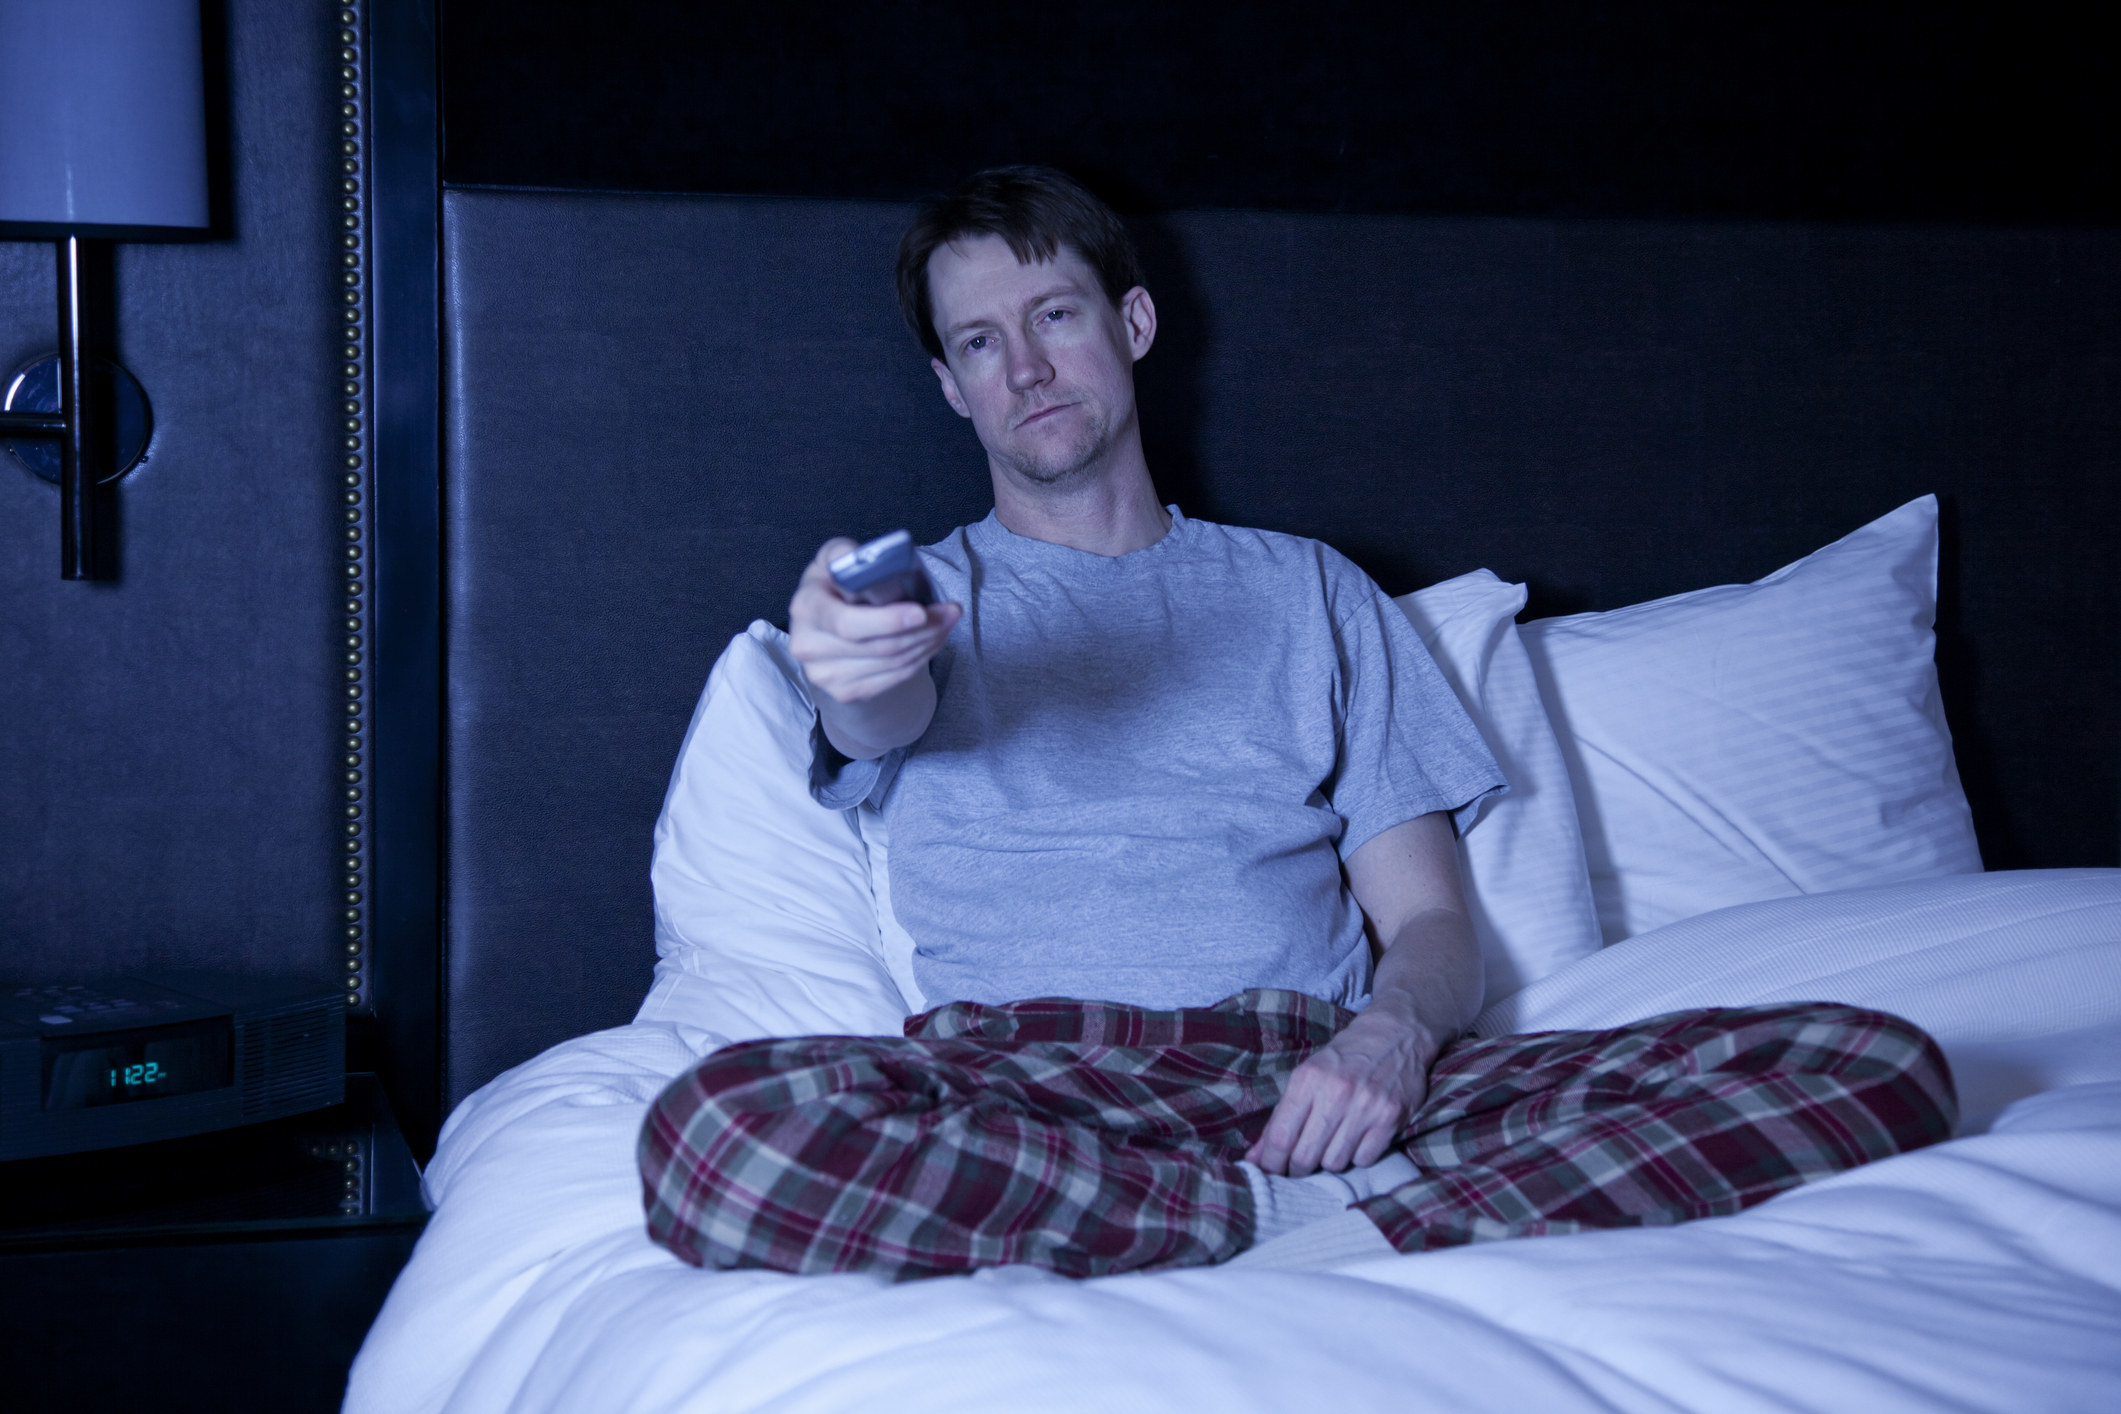 A man sitting in bed clicking the remote control